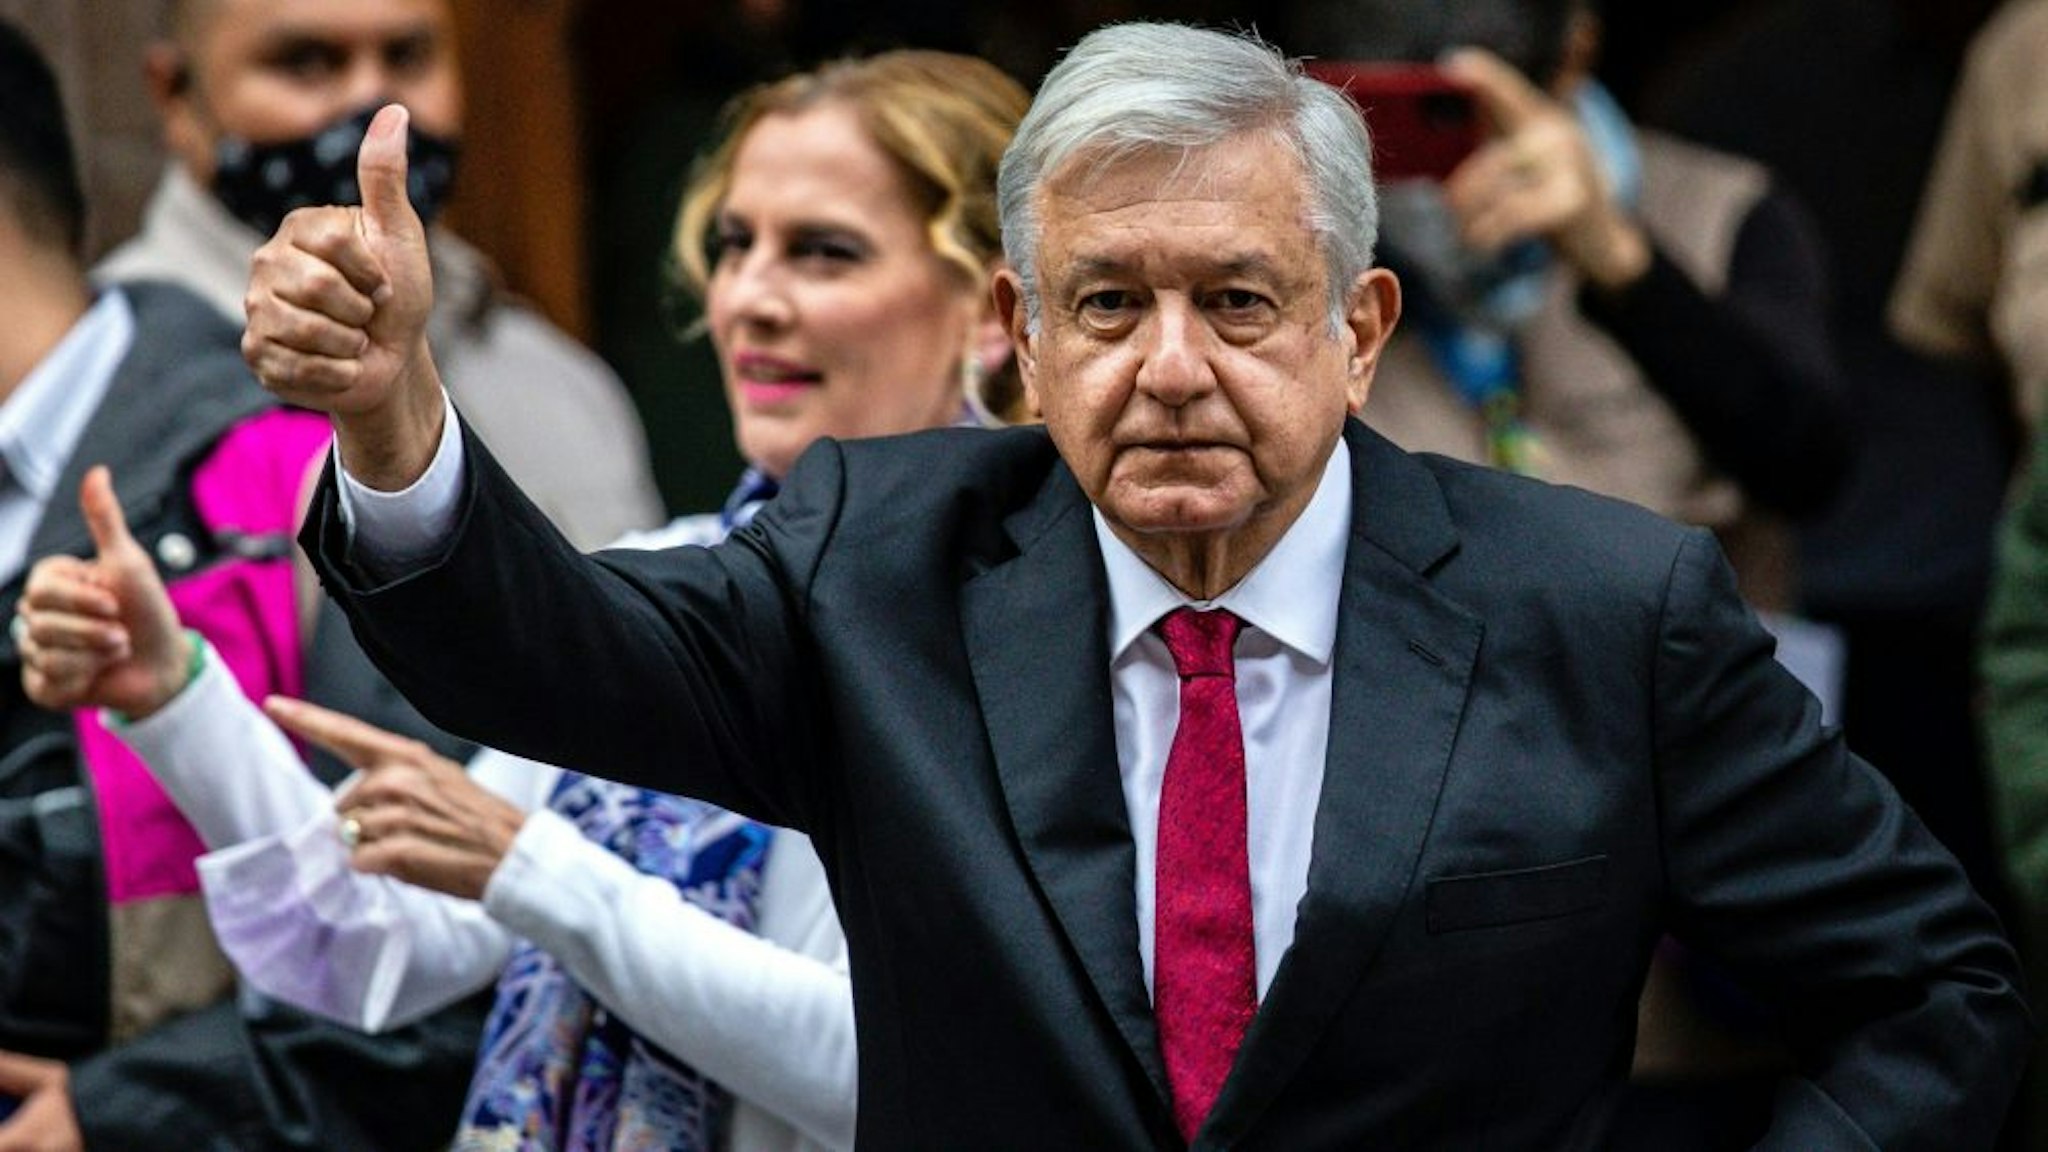 MEXICO CITY, MEXICO - JUNE 06: President of Mexico Andres Manuel Lopez Obrador gives a thumb up after voting at the polling place on June 06, 2021 in Mexico City, Mexico. A record number of 93.5 million citizens are able to vote today in the largest election in the country's history. 500 deputies, governors in 15 states and 20,000 local authorities will be elected. During the campaign, 35 candidates were reported murdered.